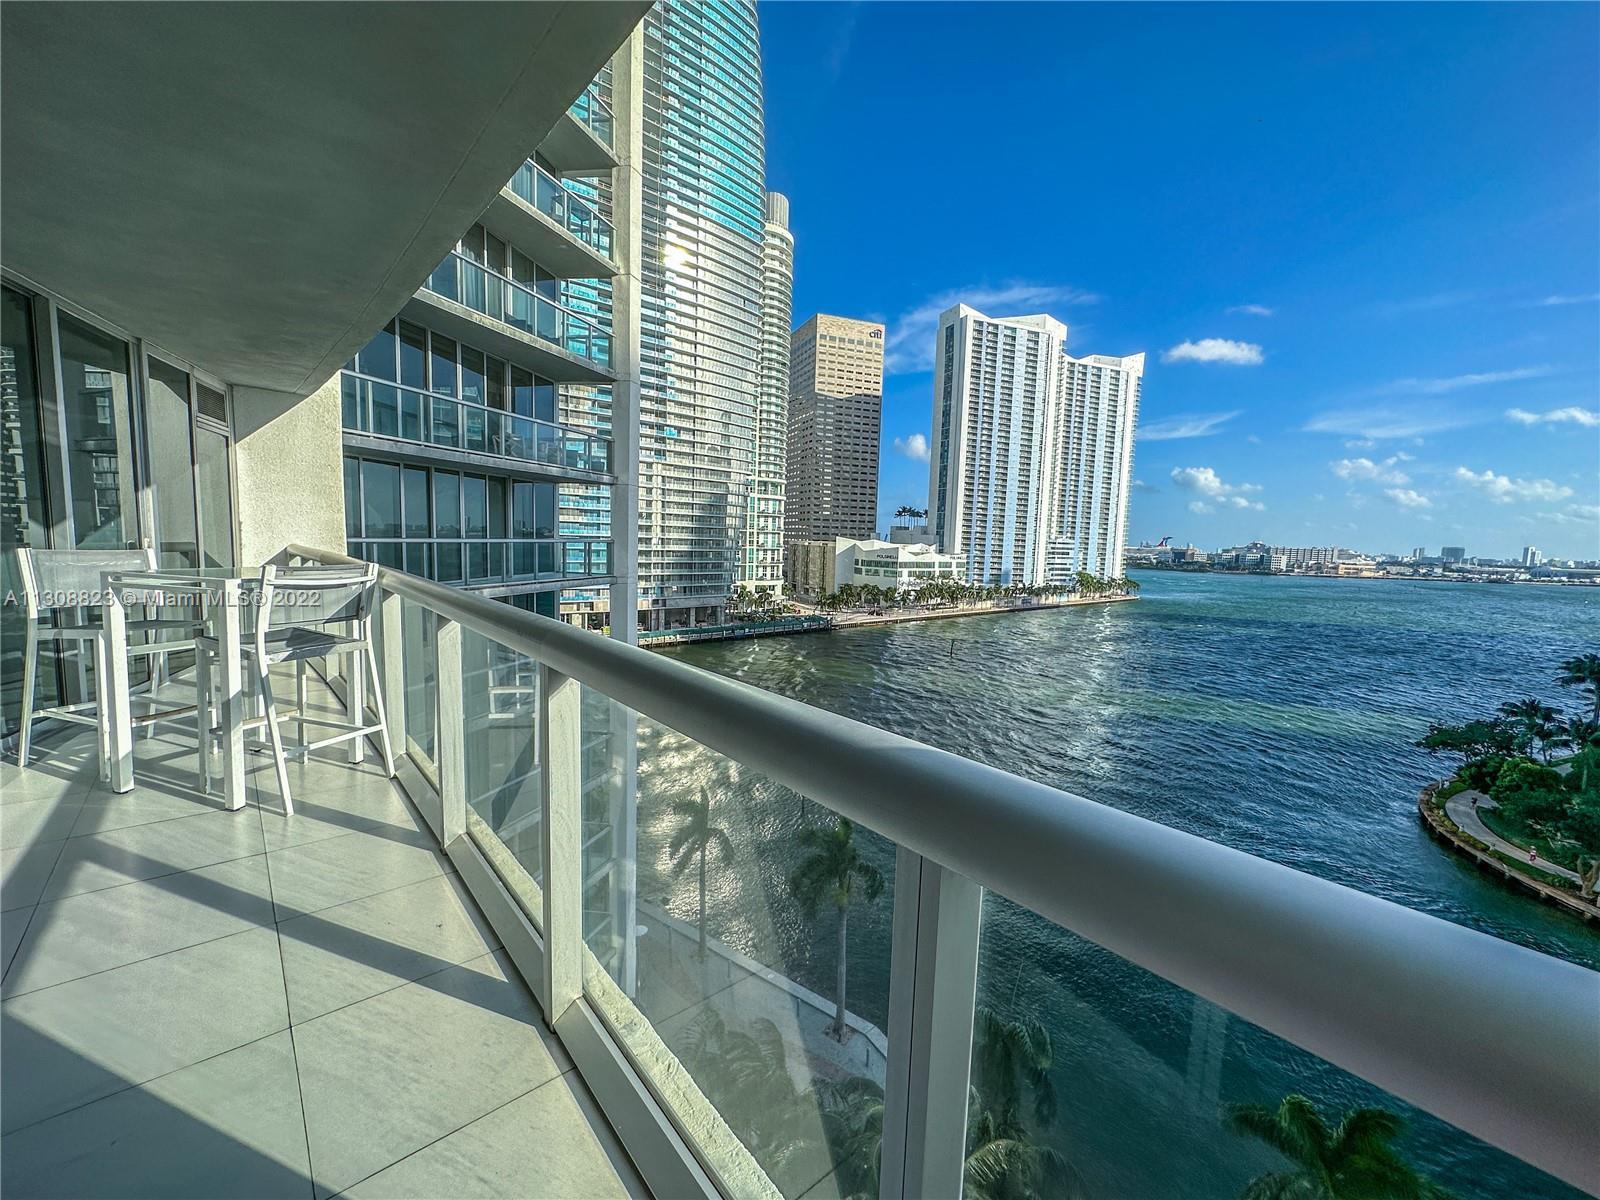 Enjoy breathtaking Bayline views from this stunning one bedroom with ensuite bathroom condo at IconB